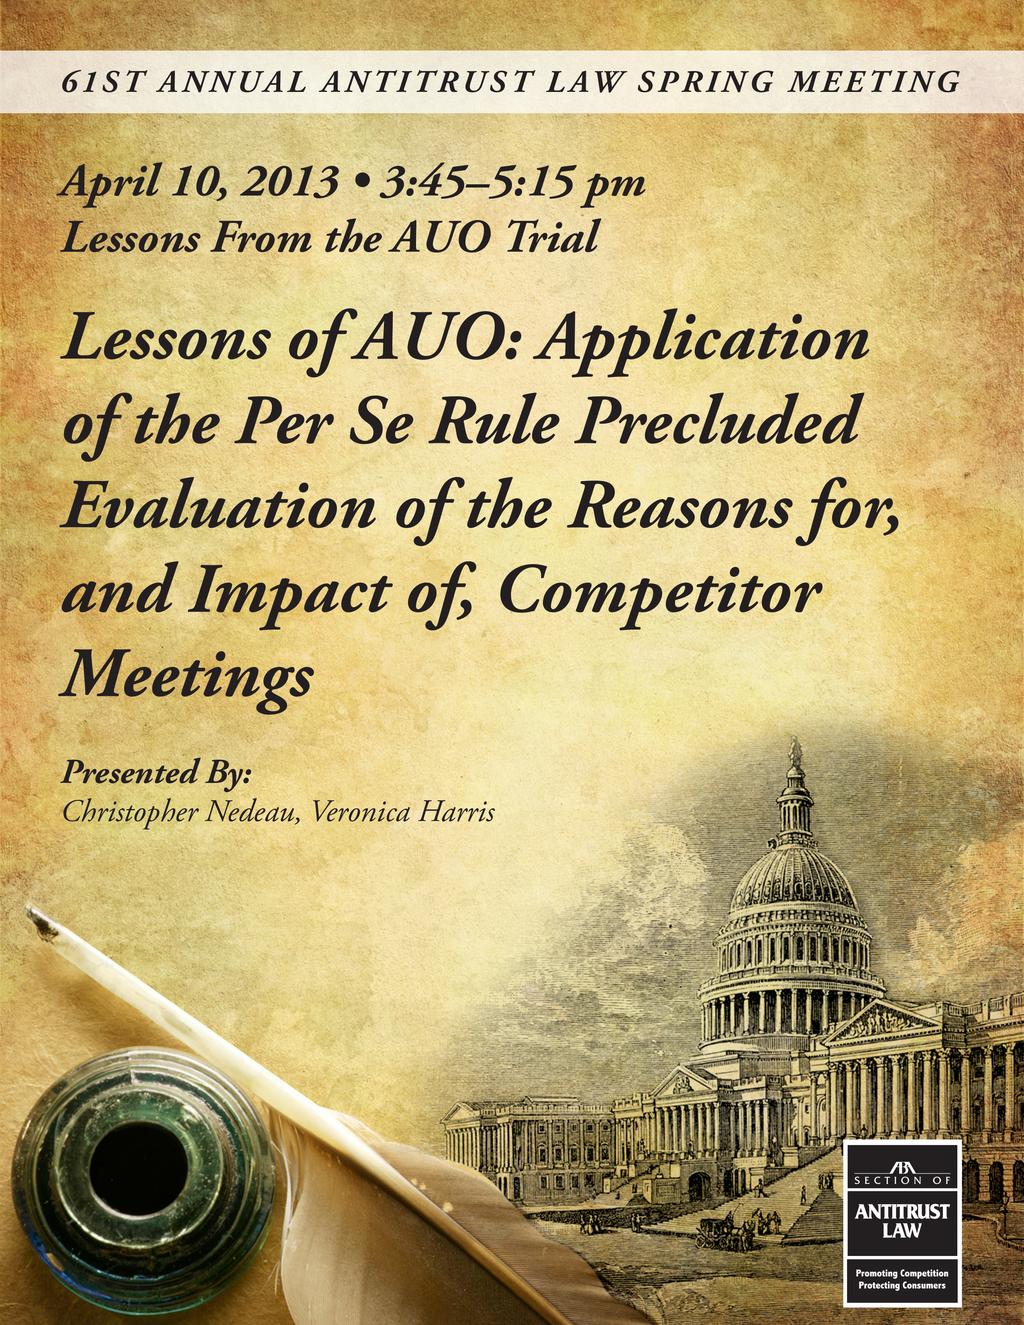 61ST ANNUAL ANTITRUST LAW SPRING MEETING April 10, 2013 3:45-5:15 pm Lessons From